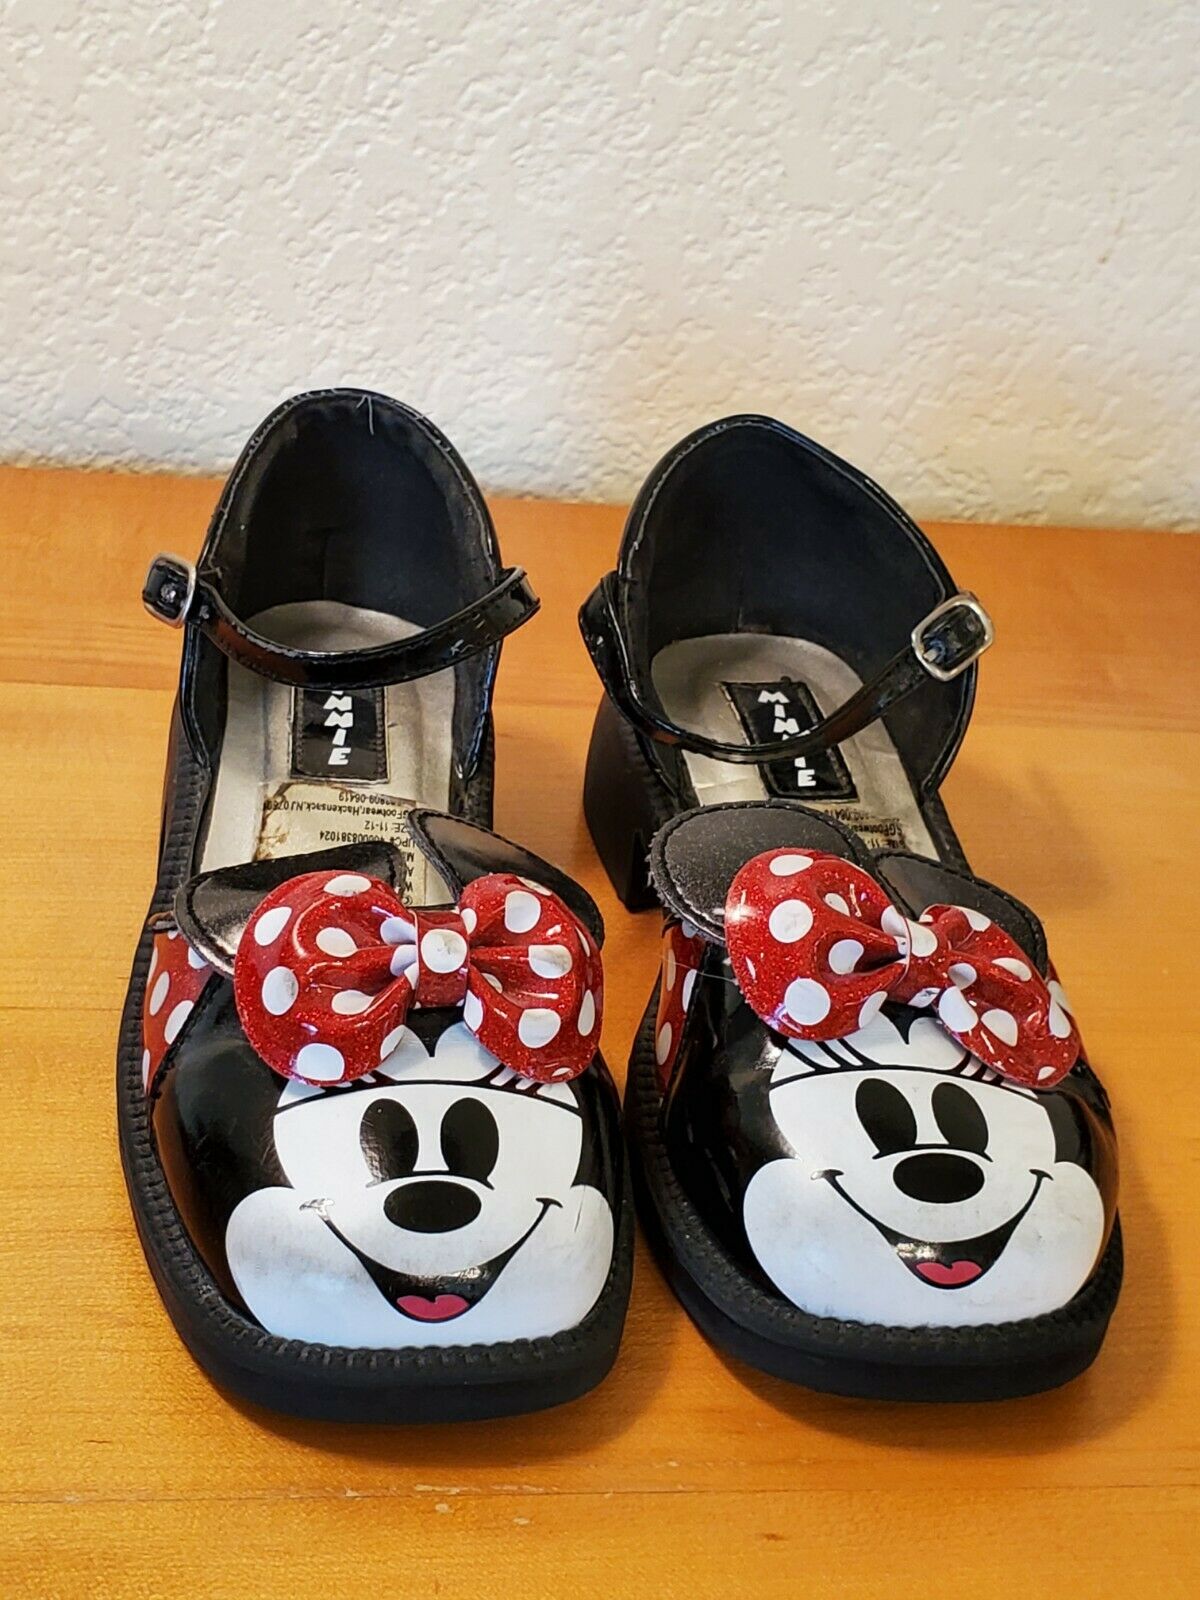 Disney Minnie Mouse Mary Jane Faux Leather Young Girl Shoes - Size 11/12 - GUC